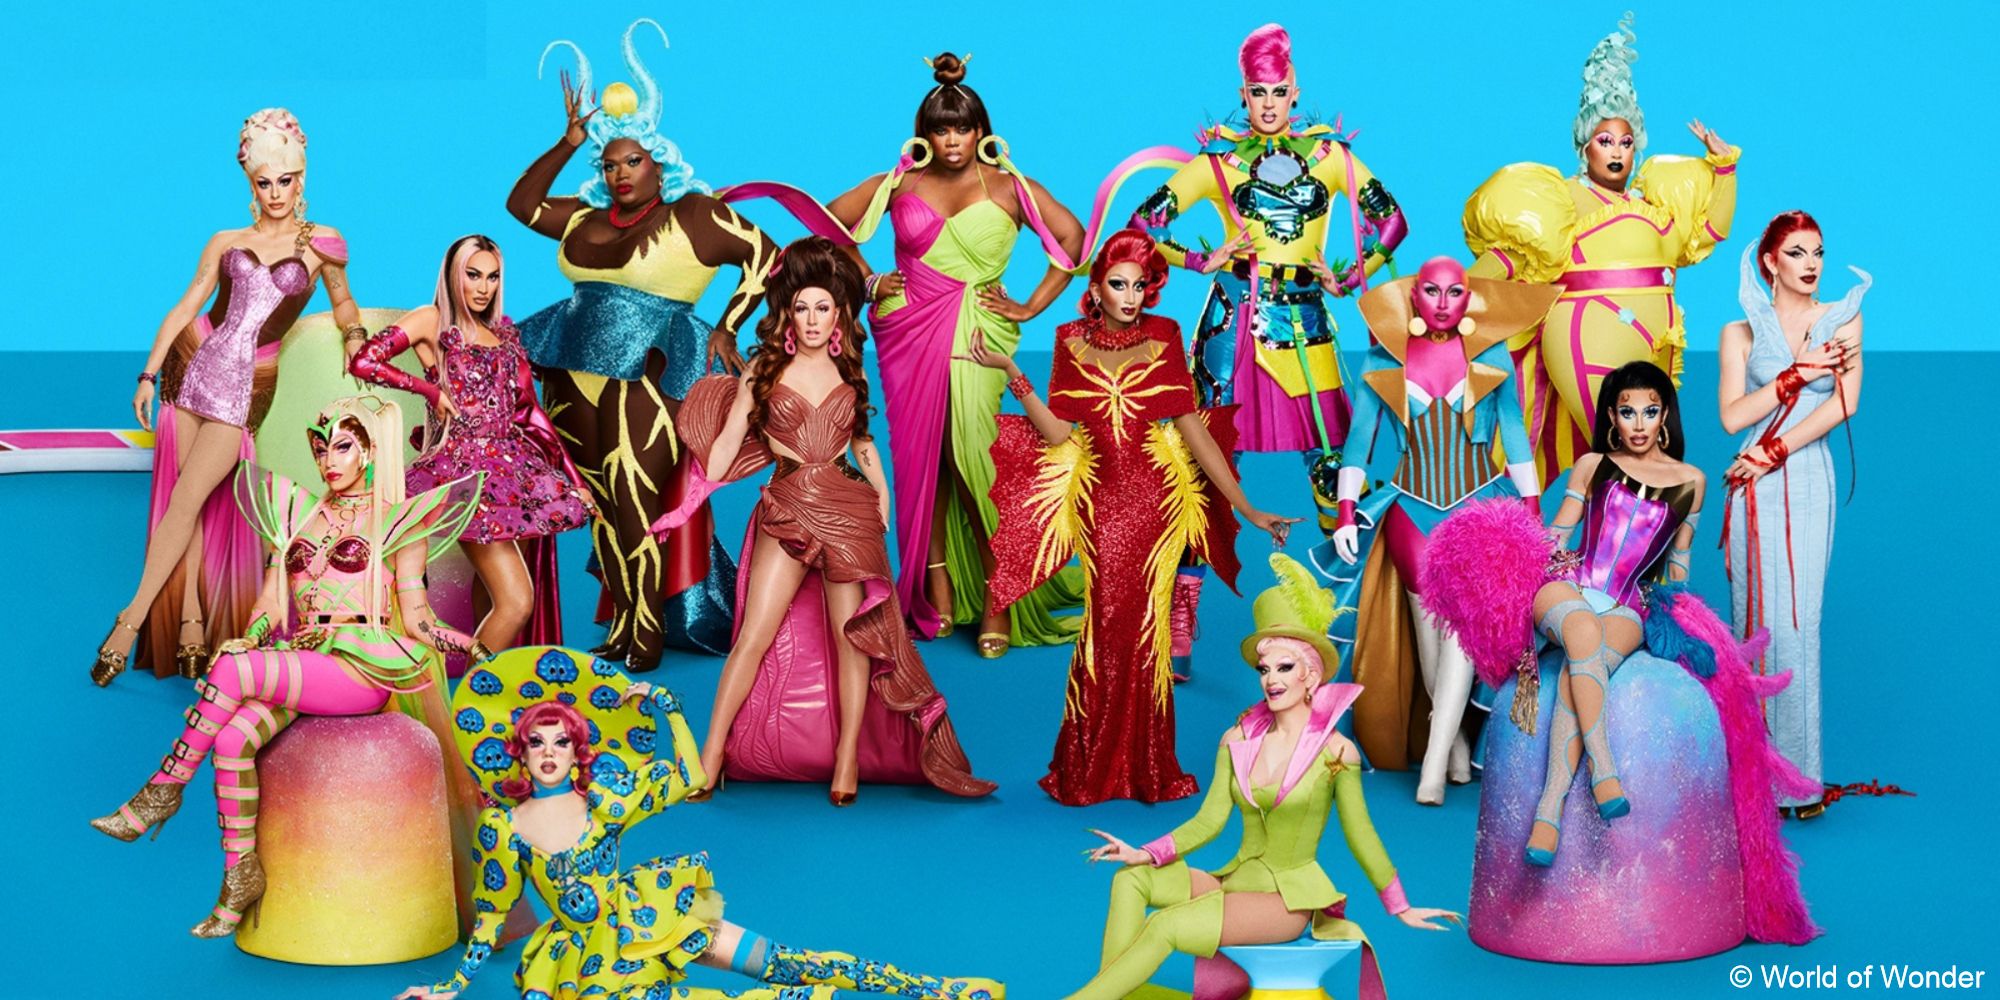 RuPaul's Drag Race Season 14 cast reveal image depicts 14 drag queens on a teal background